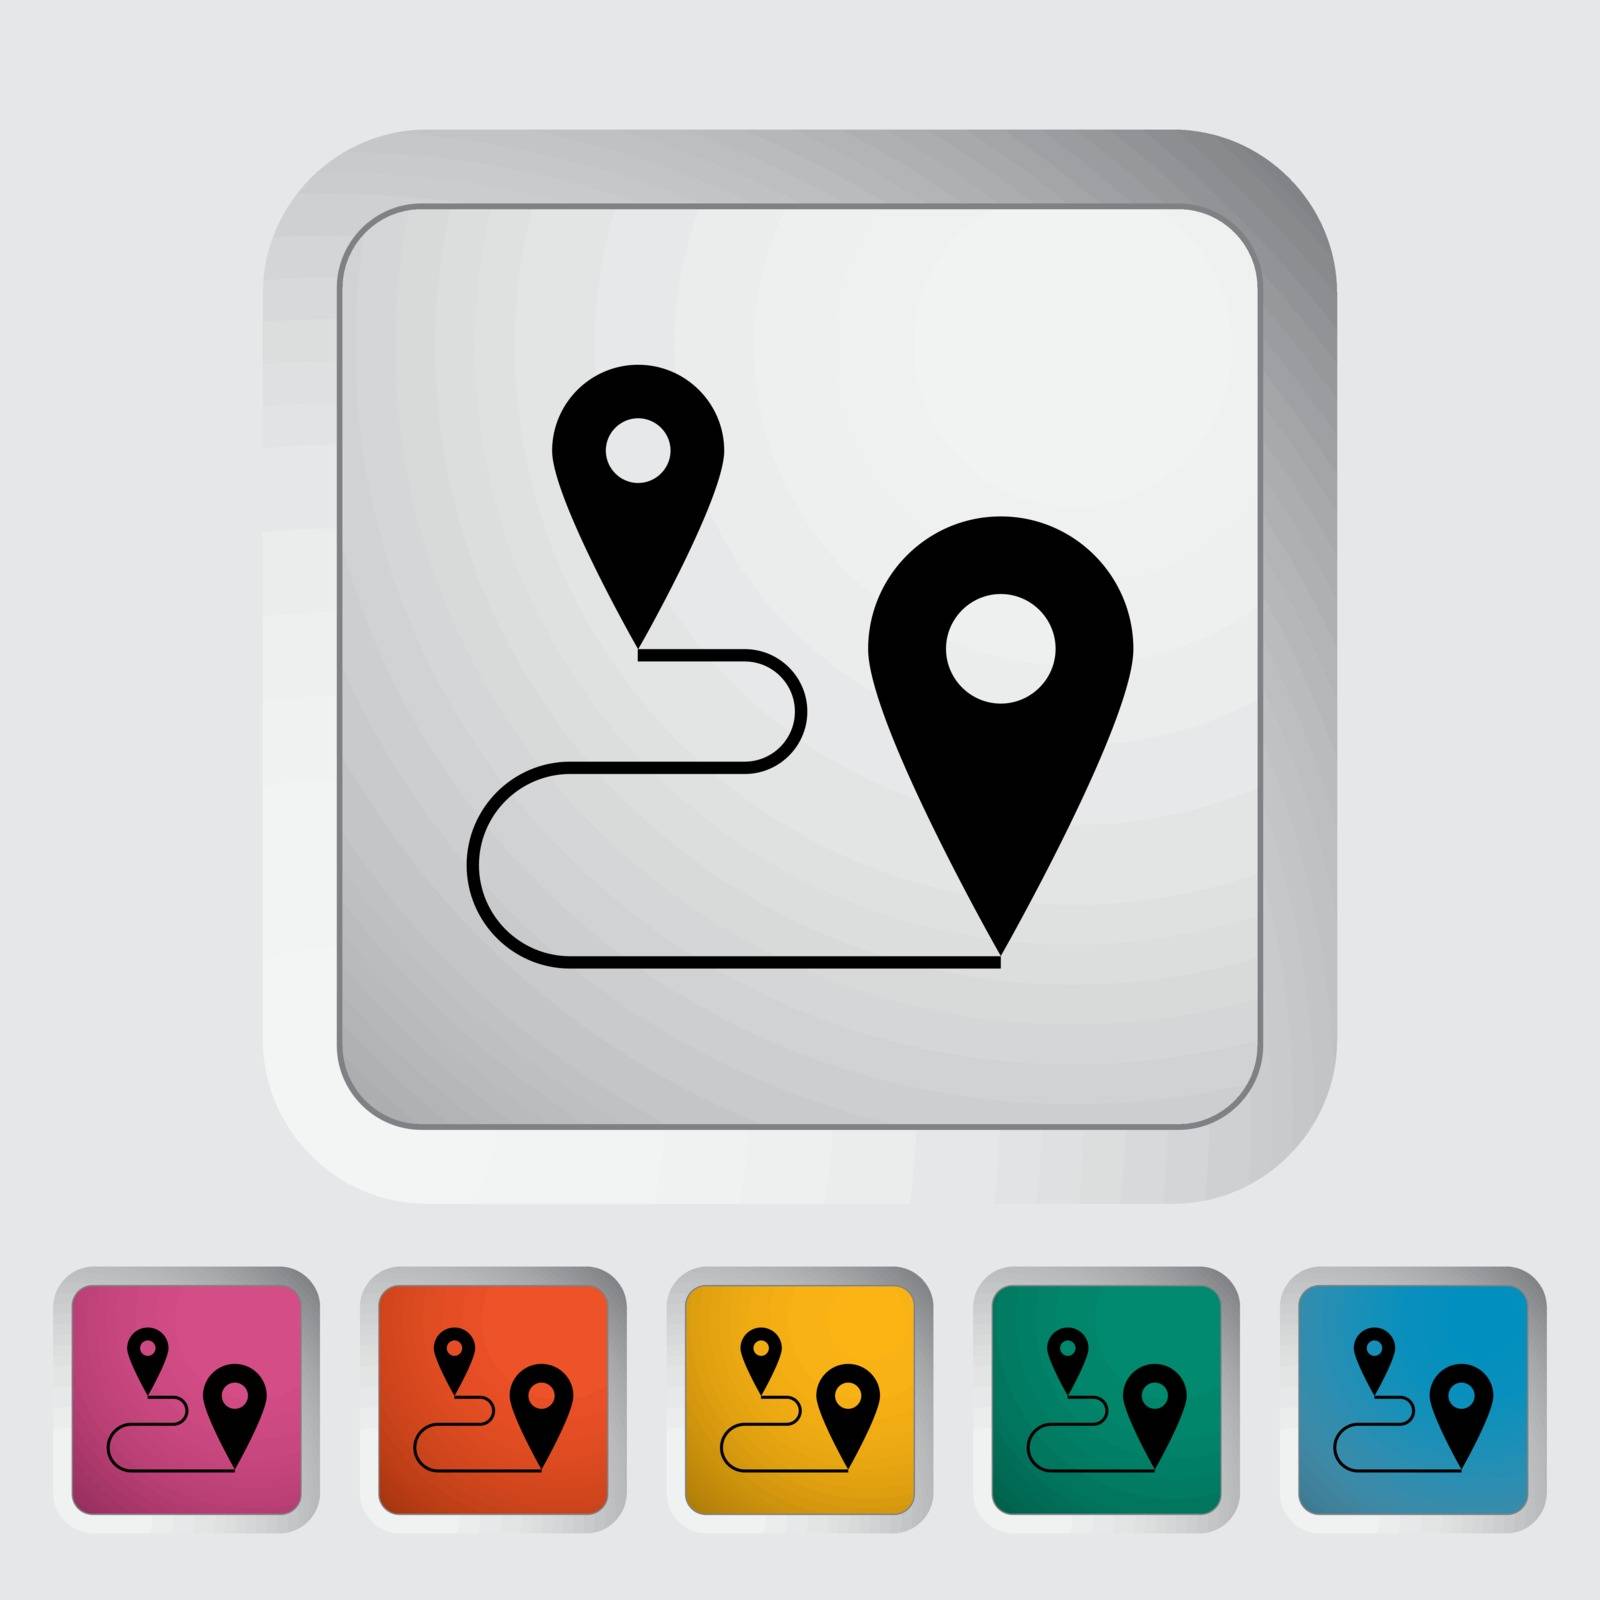 Map pointer. Single flat icon on the button. Vector illustration.